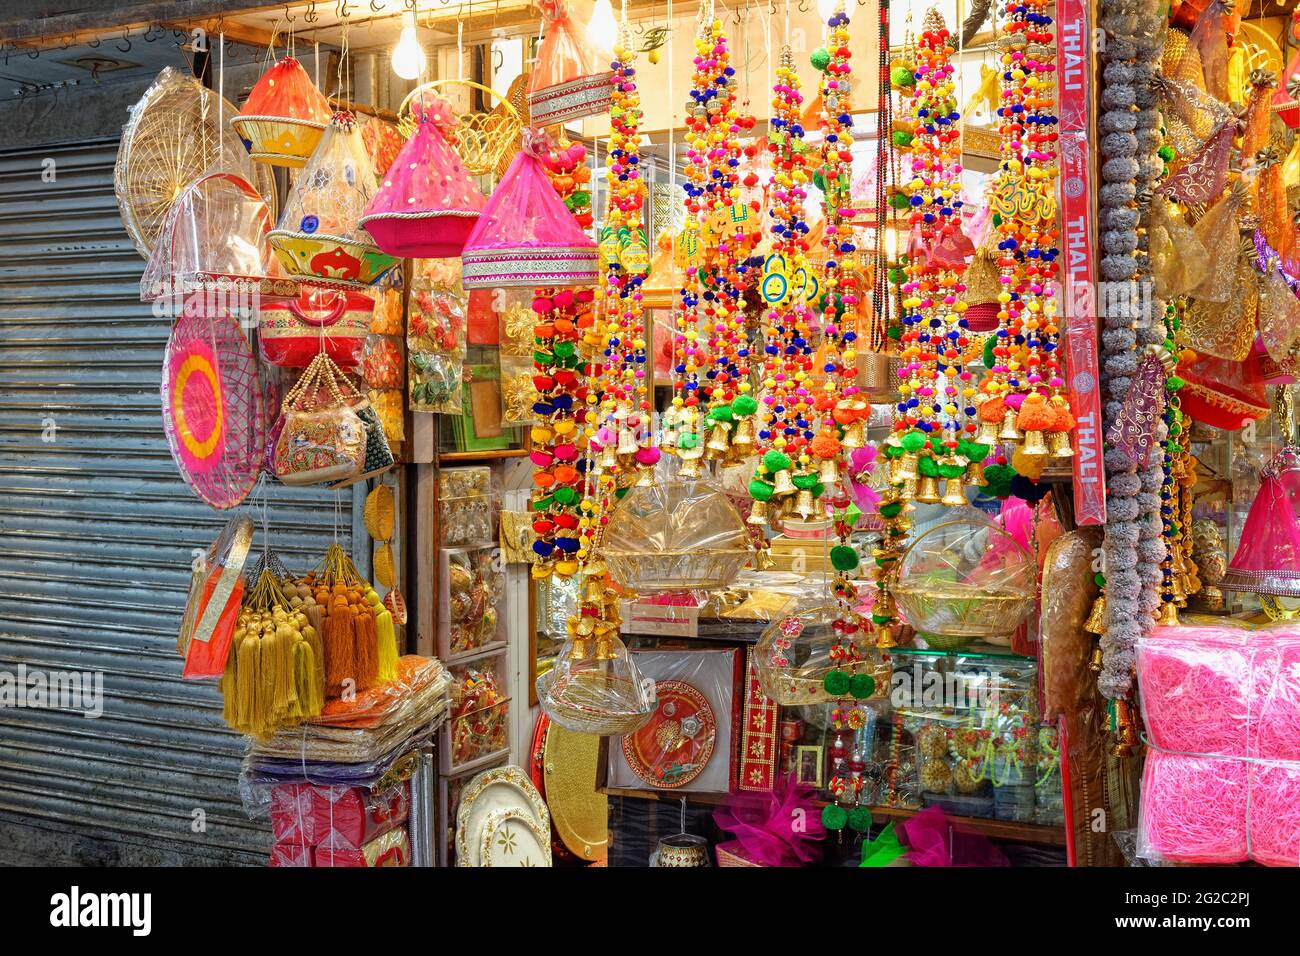 Market Stalls, Chandni Chowk bazaar, one of the oldest market place in Old  Delhi, India Stock Photo - Alamy